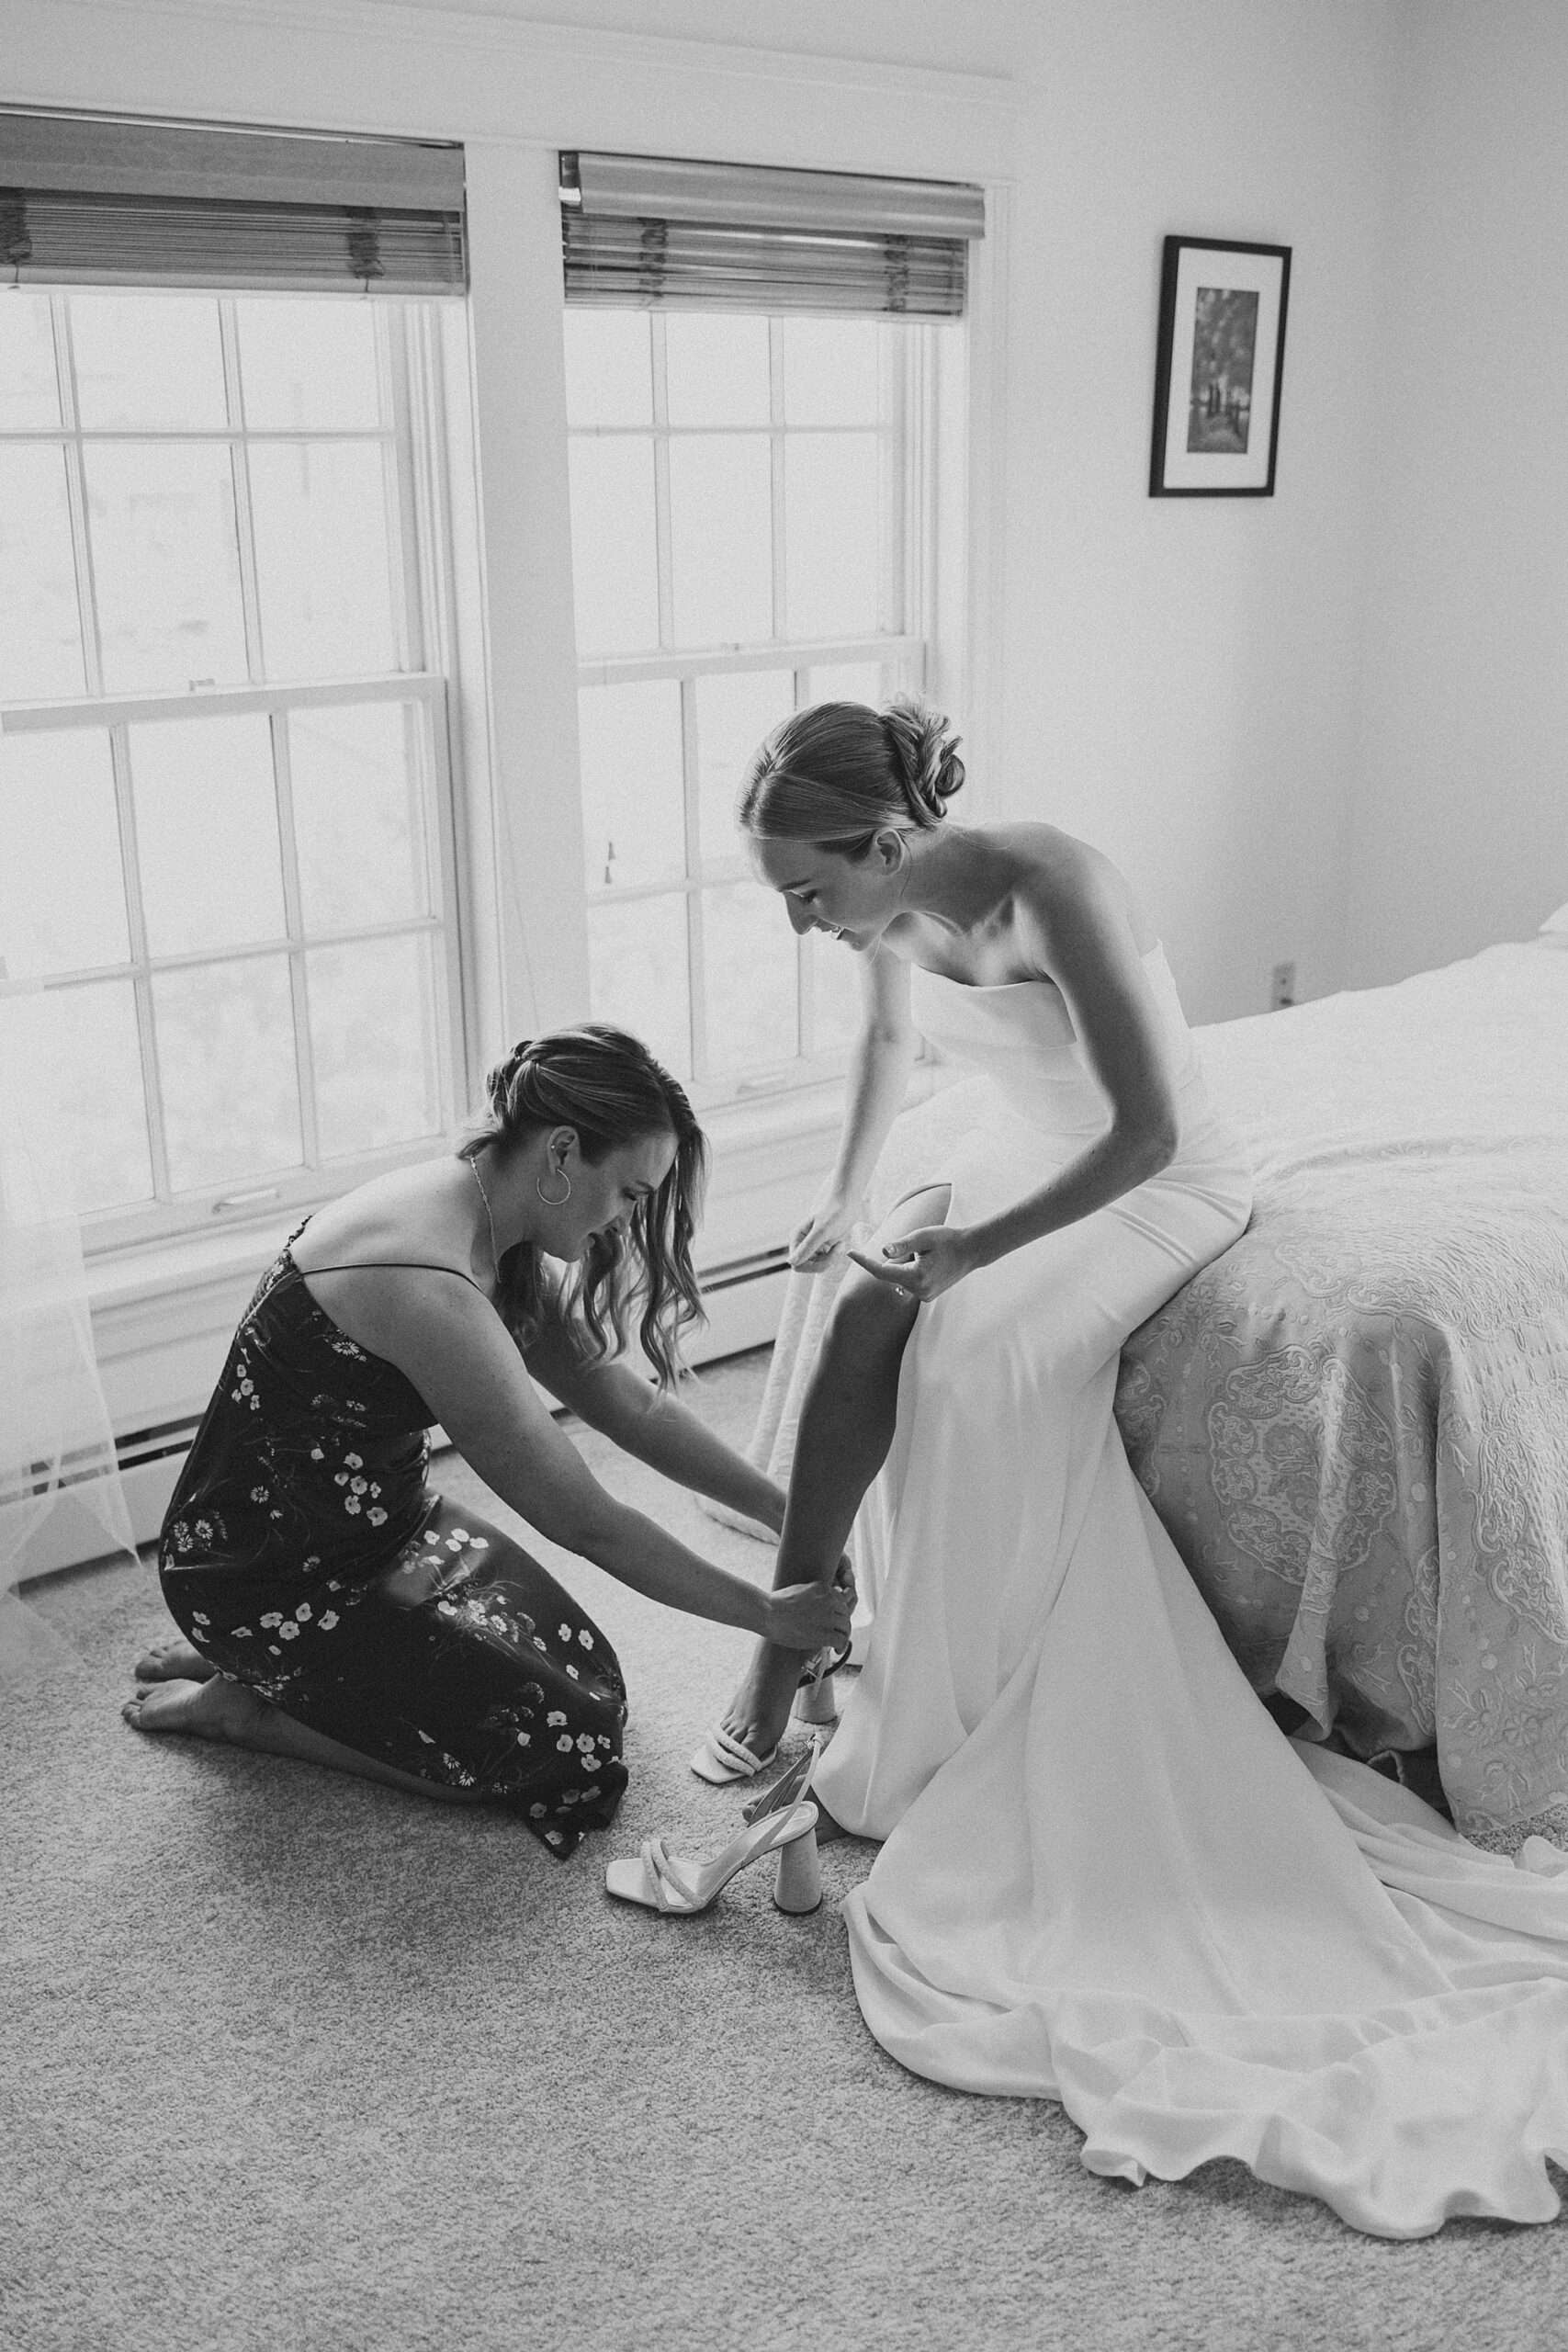 bridesmaid kneels to help bride put on shows in NJ home